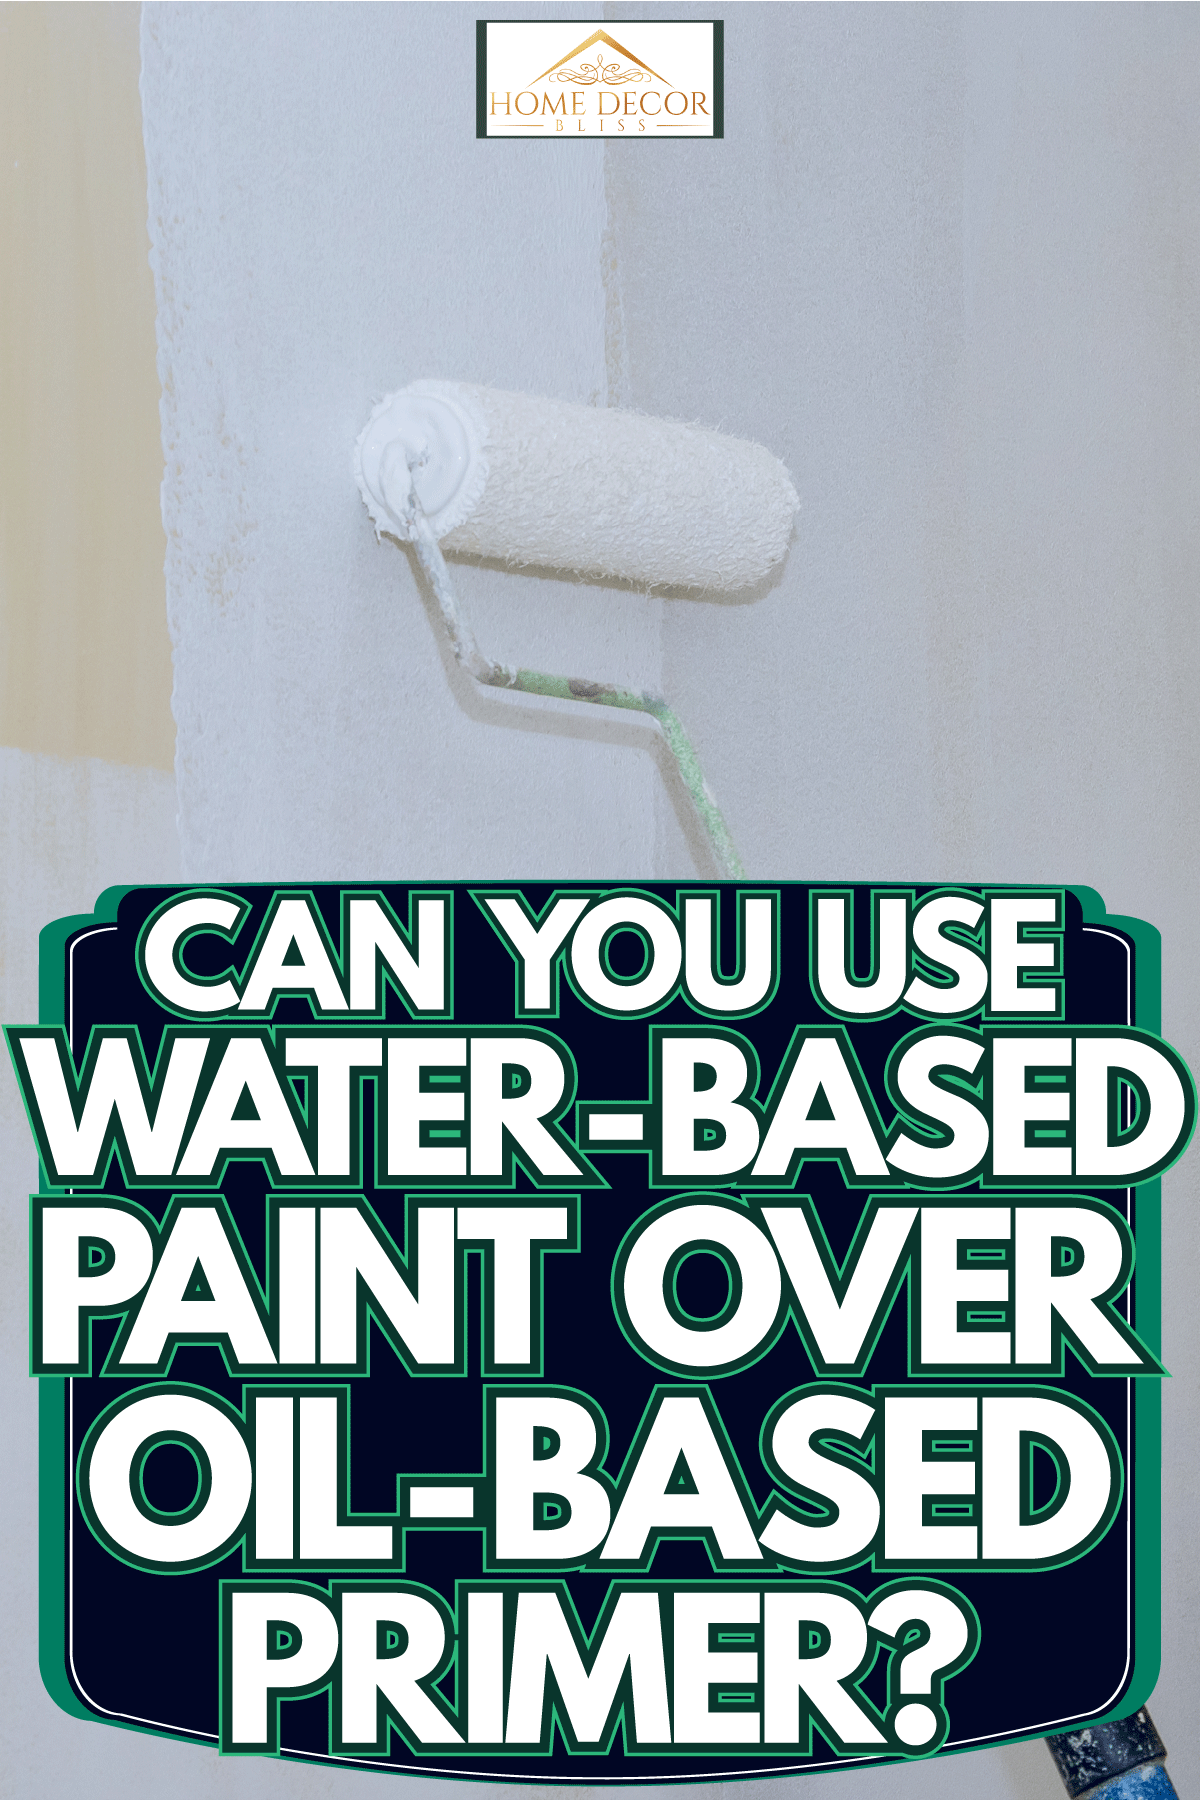 Applying white paint on the walls, Can You Use Water-Based Paint Over Oil-Based Primer?